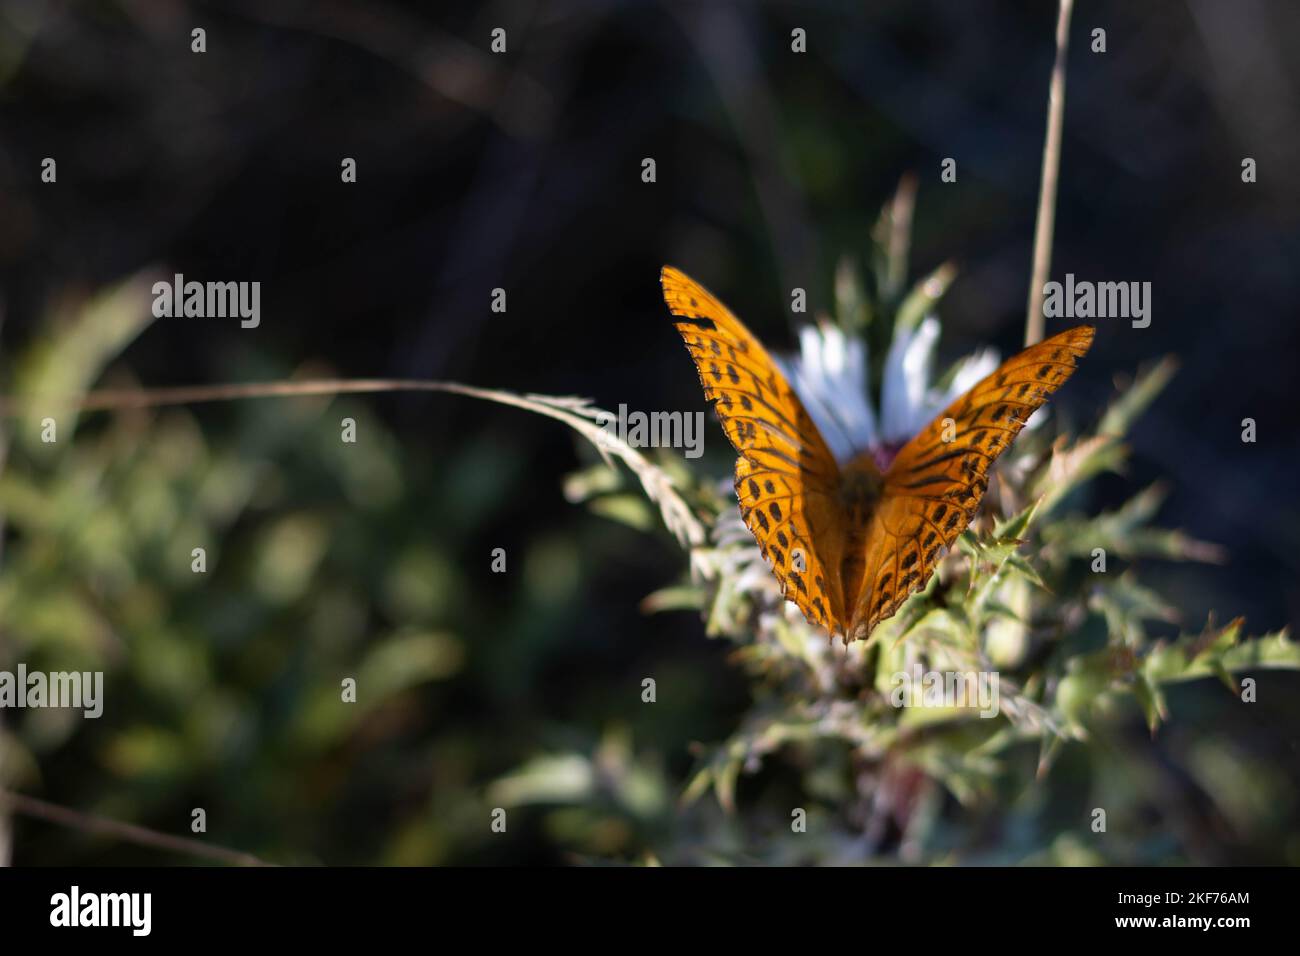 Silver washed fritillary butterfly, deep orange with black spots, Parma Italy. High quality photo Stock Photo